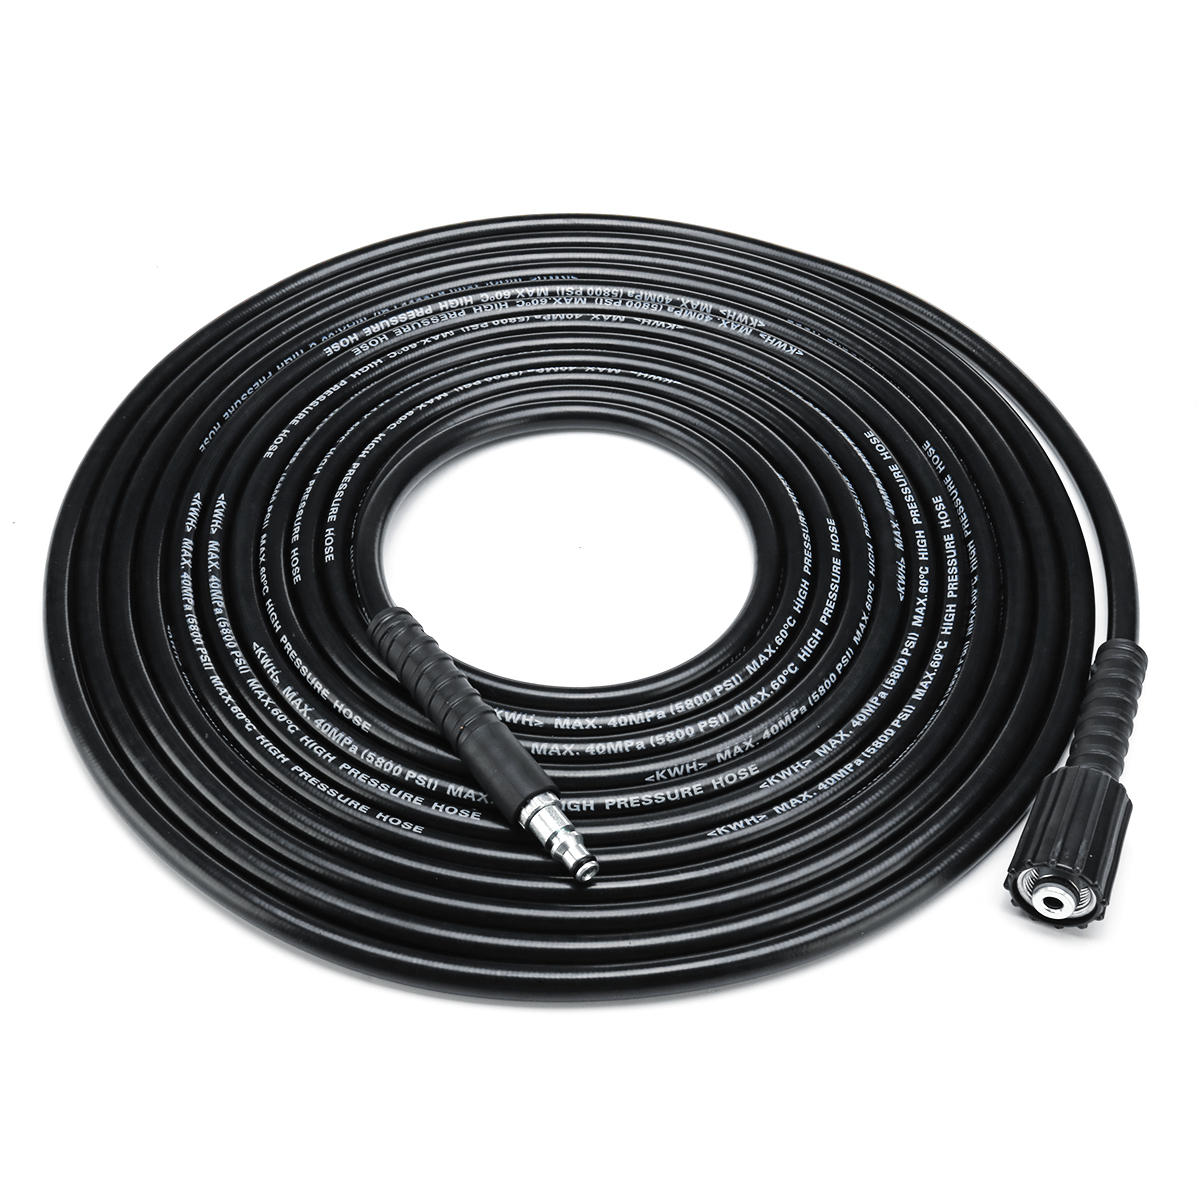 8M 5800PSI High Pressure Water Cleaner Washer Hose for BLACK & DECKER 50991